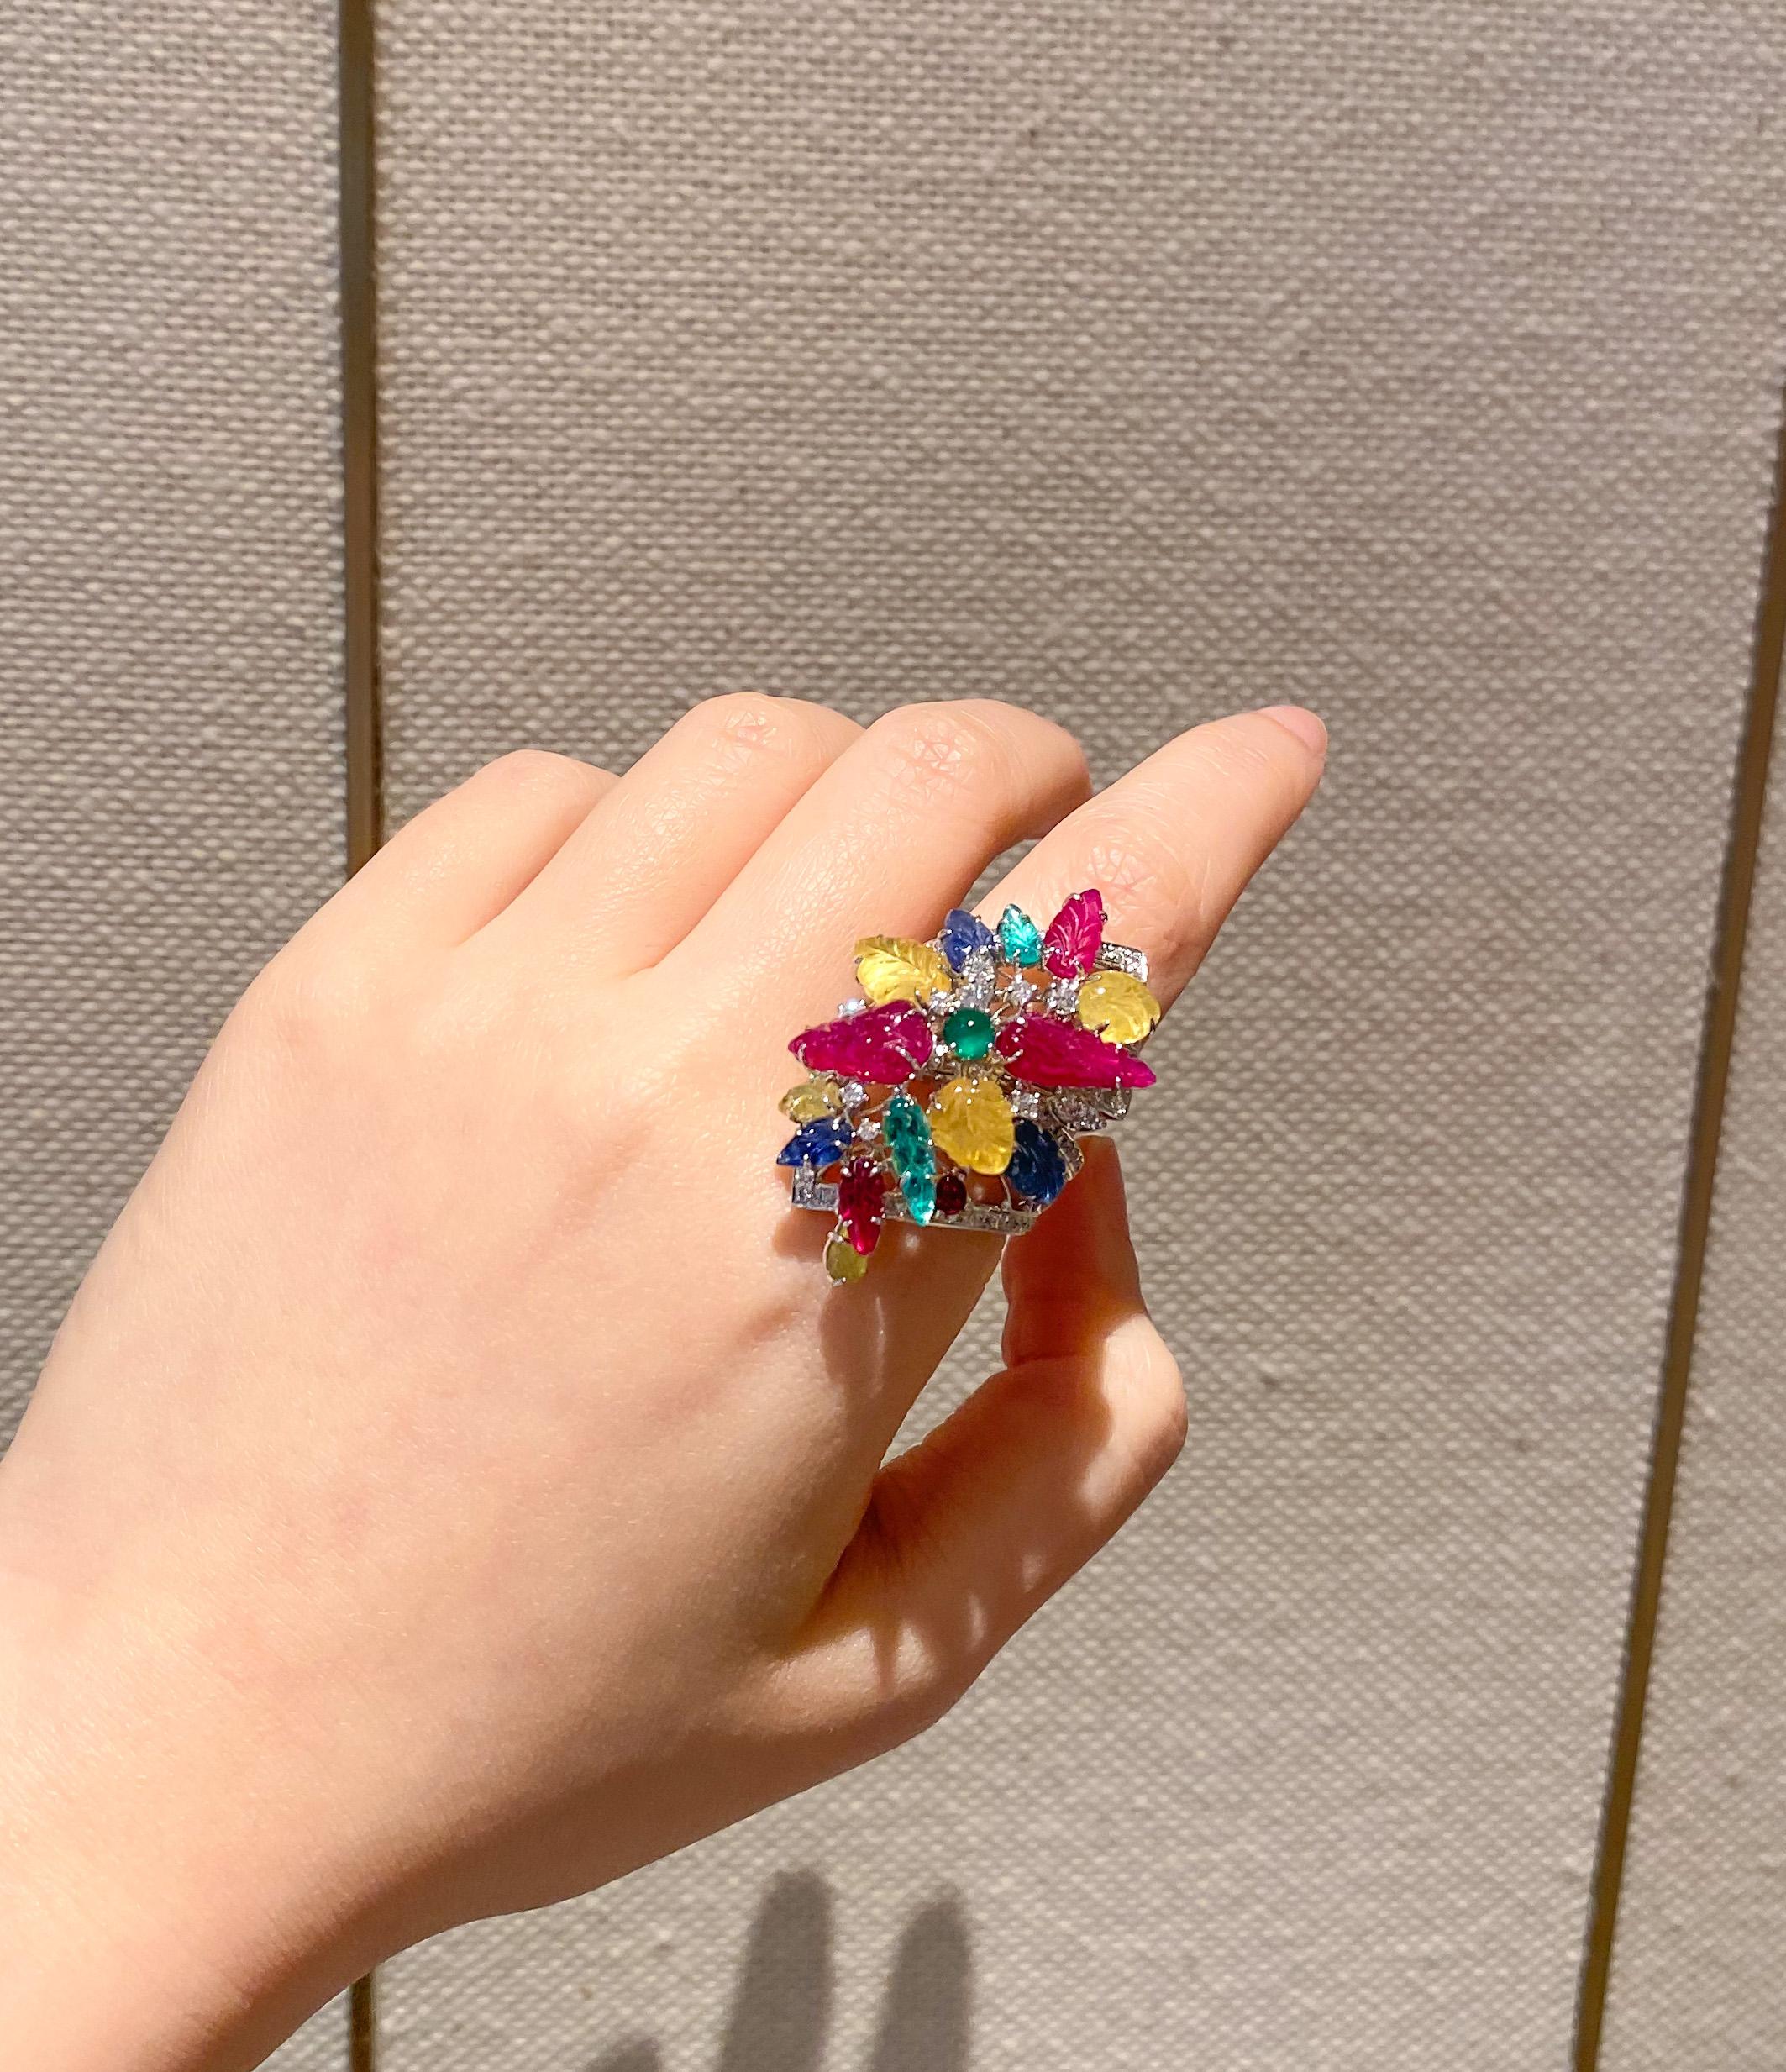 Designed to fit as if intertwining, Dilys’ interpretation of foliage is exquisite yet extremely wearable. Inspired by the Art Deco movement, this playfully elegant cocktail ring designed by the renowned Hong Kong jewelry designer, Dilys Young, mixes